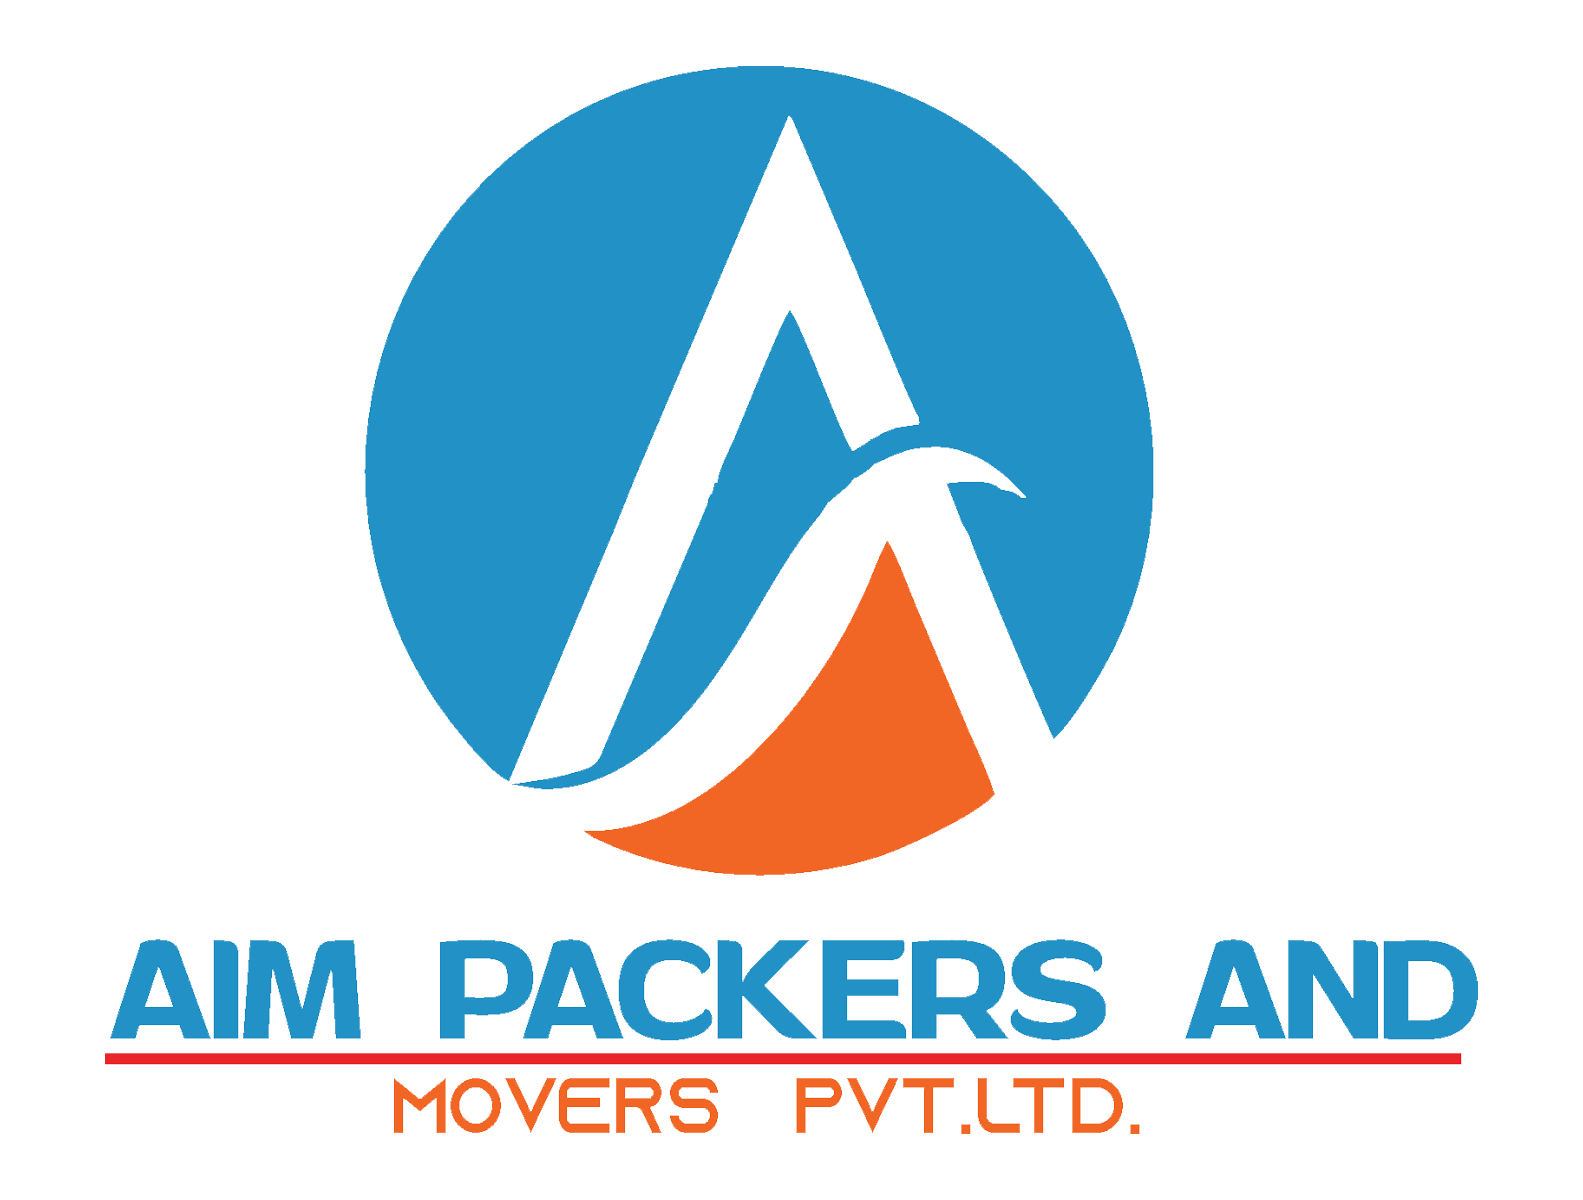 Aim Packers Movers logo